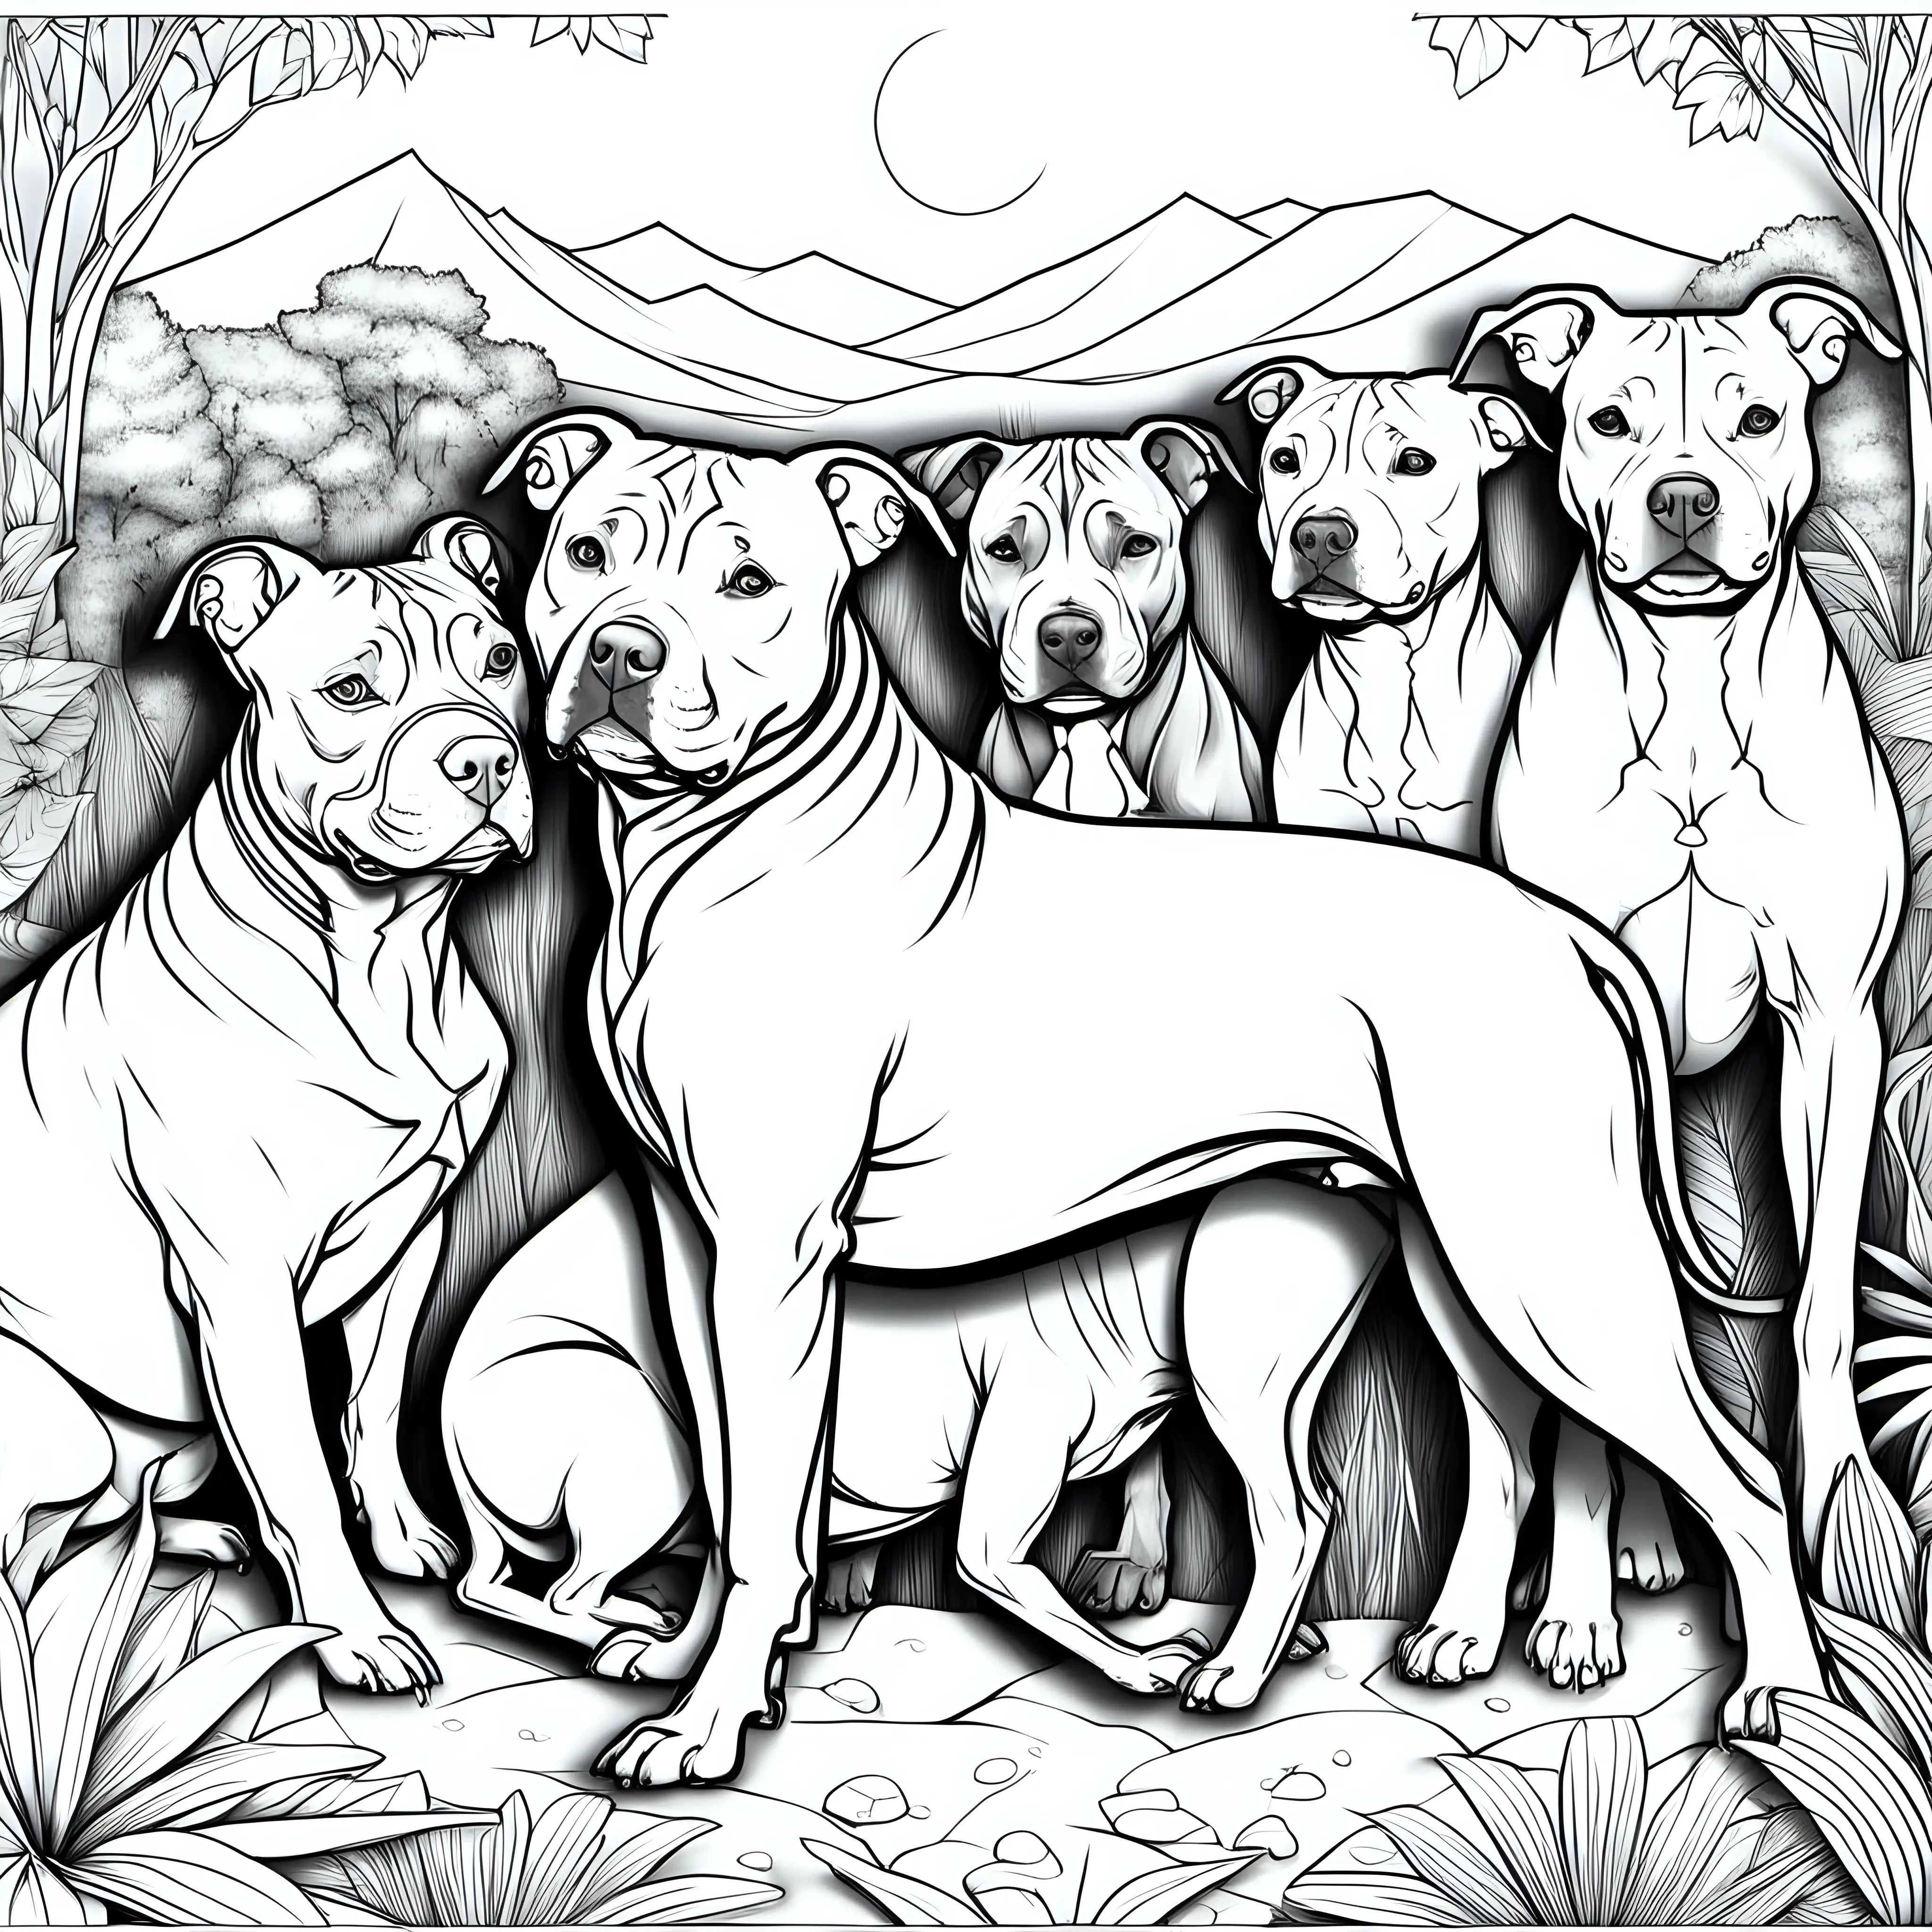  pitbull socializing with other animals, highlighting their friendly and sociable nature coloring page for adults